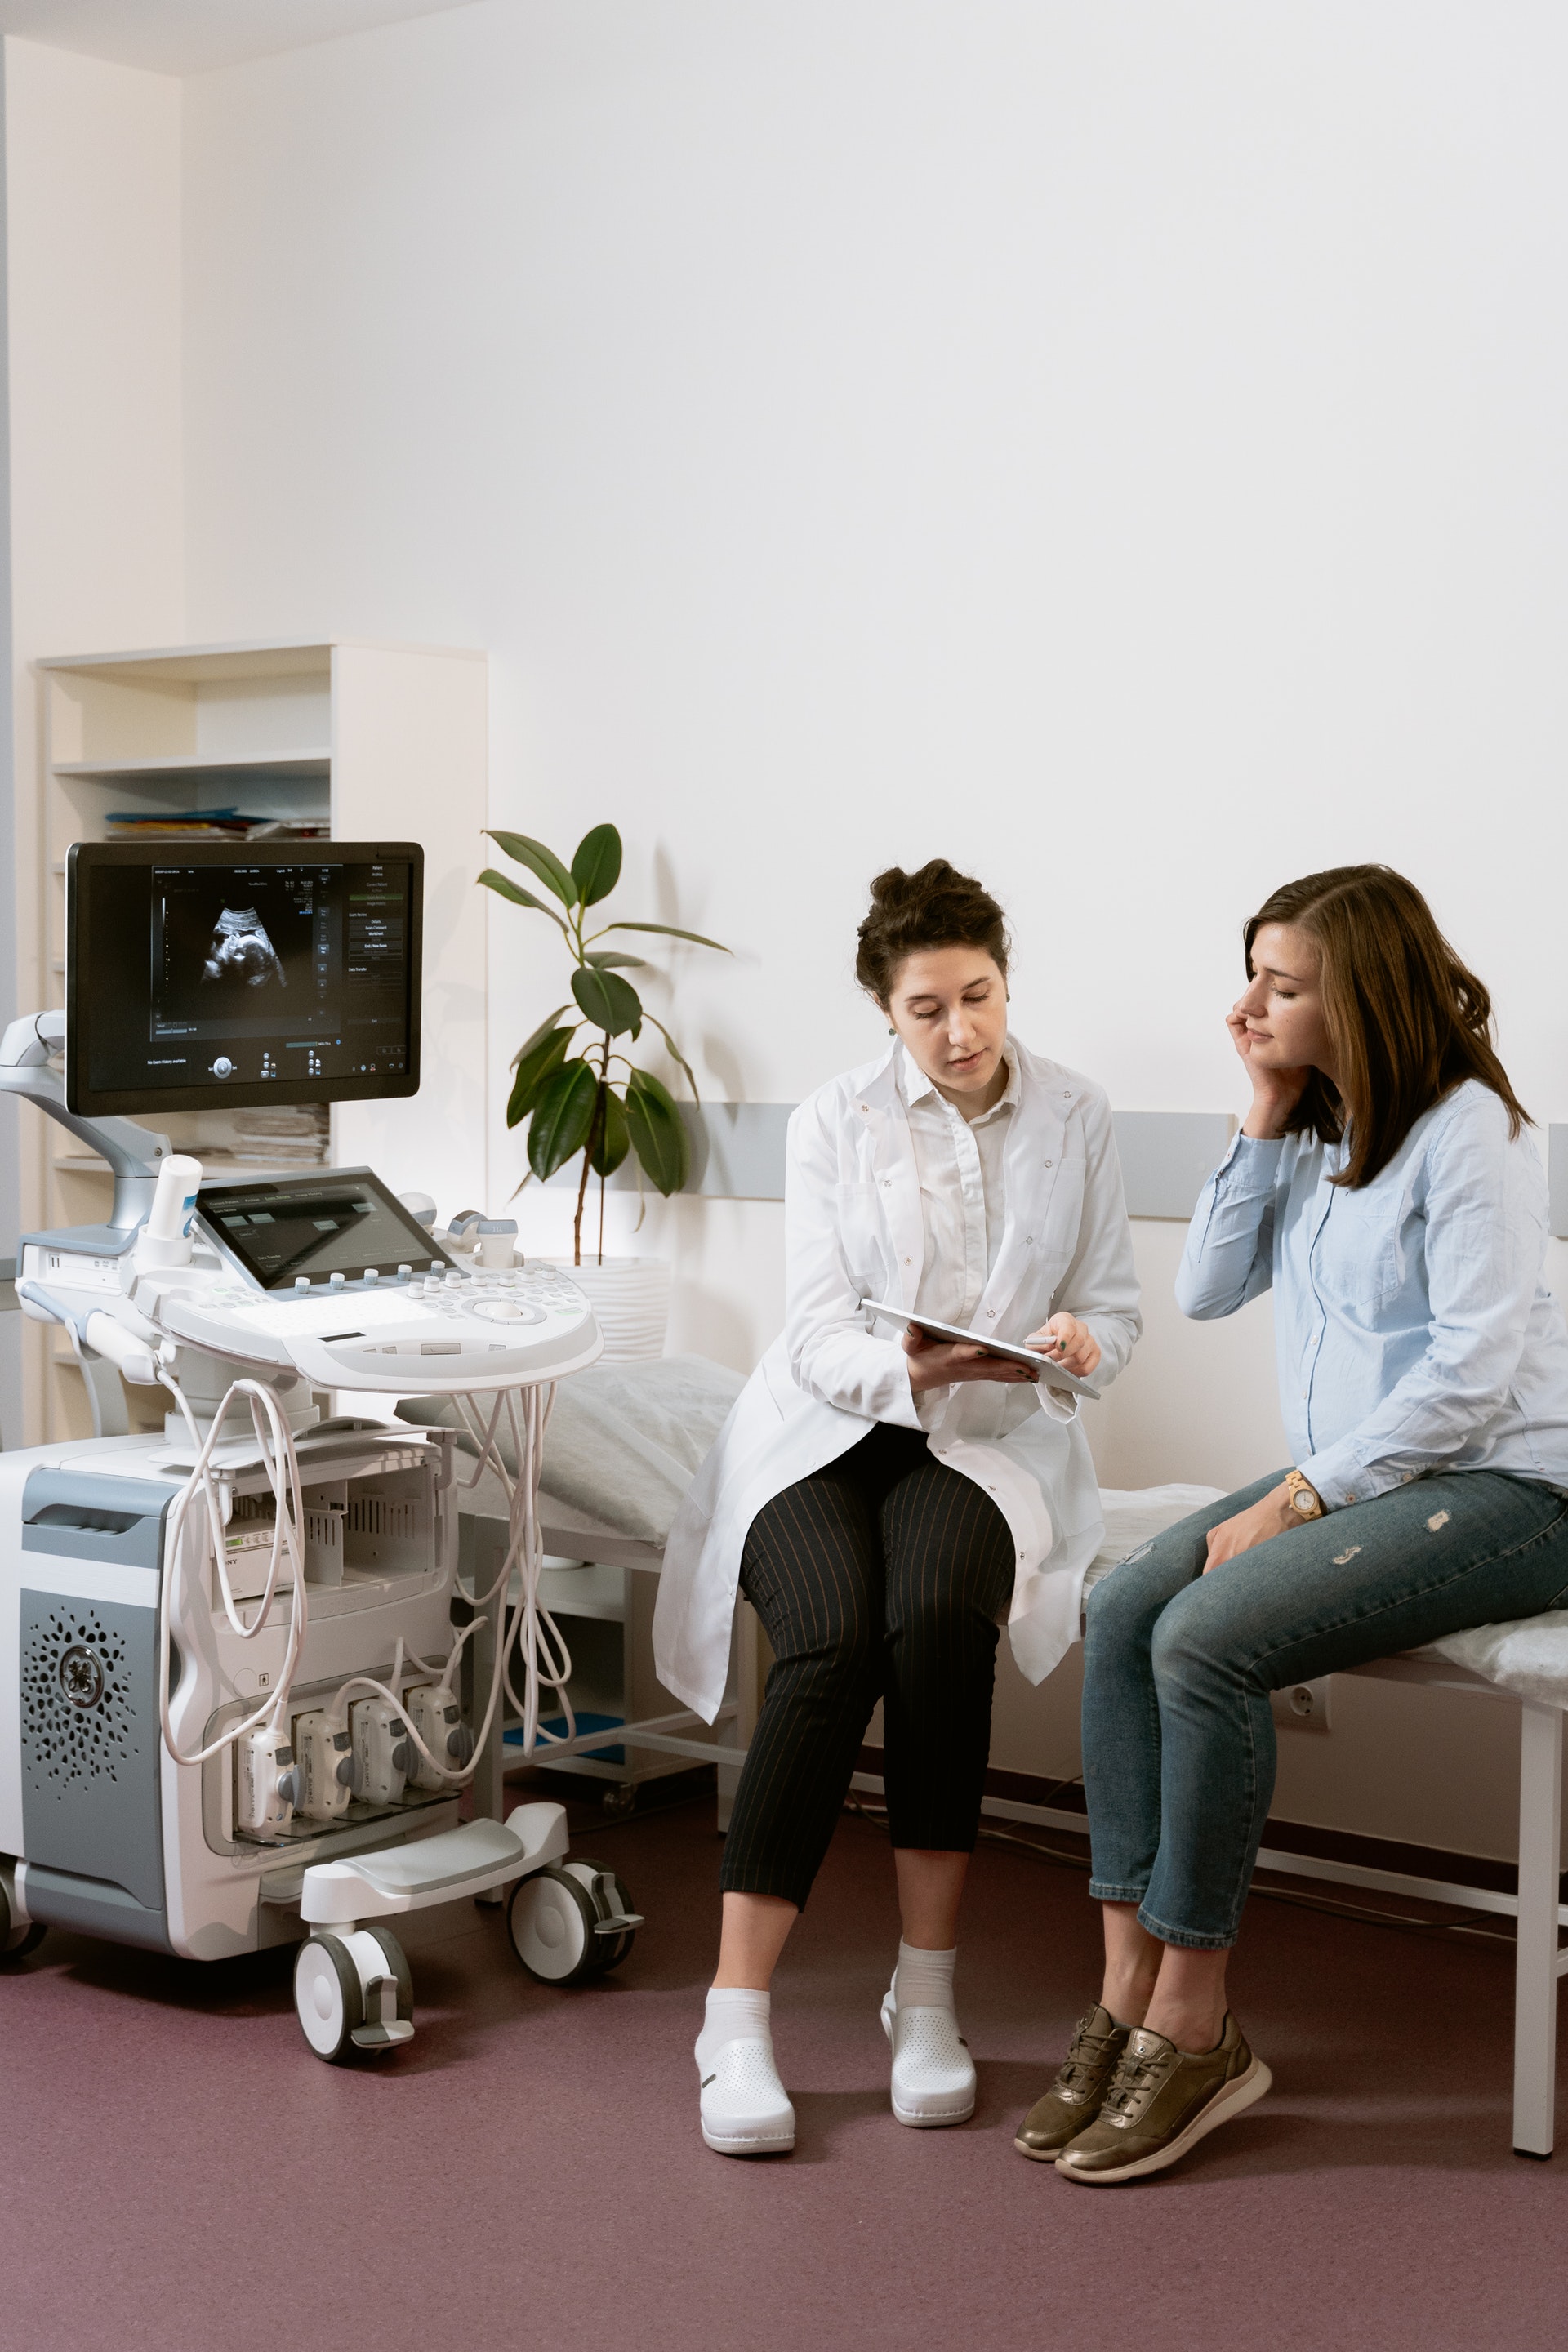 A woman doctor is talking to a woman on a patient's bed, and an ultrasound machine is present beside them